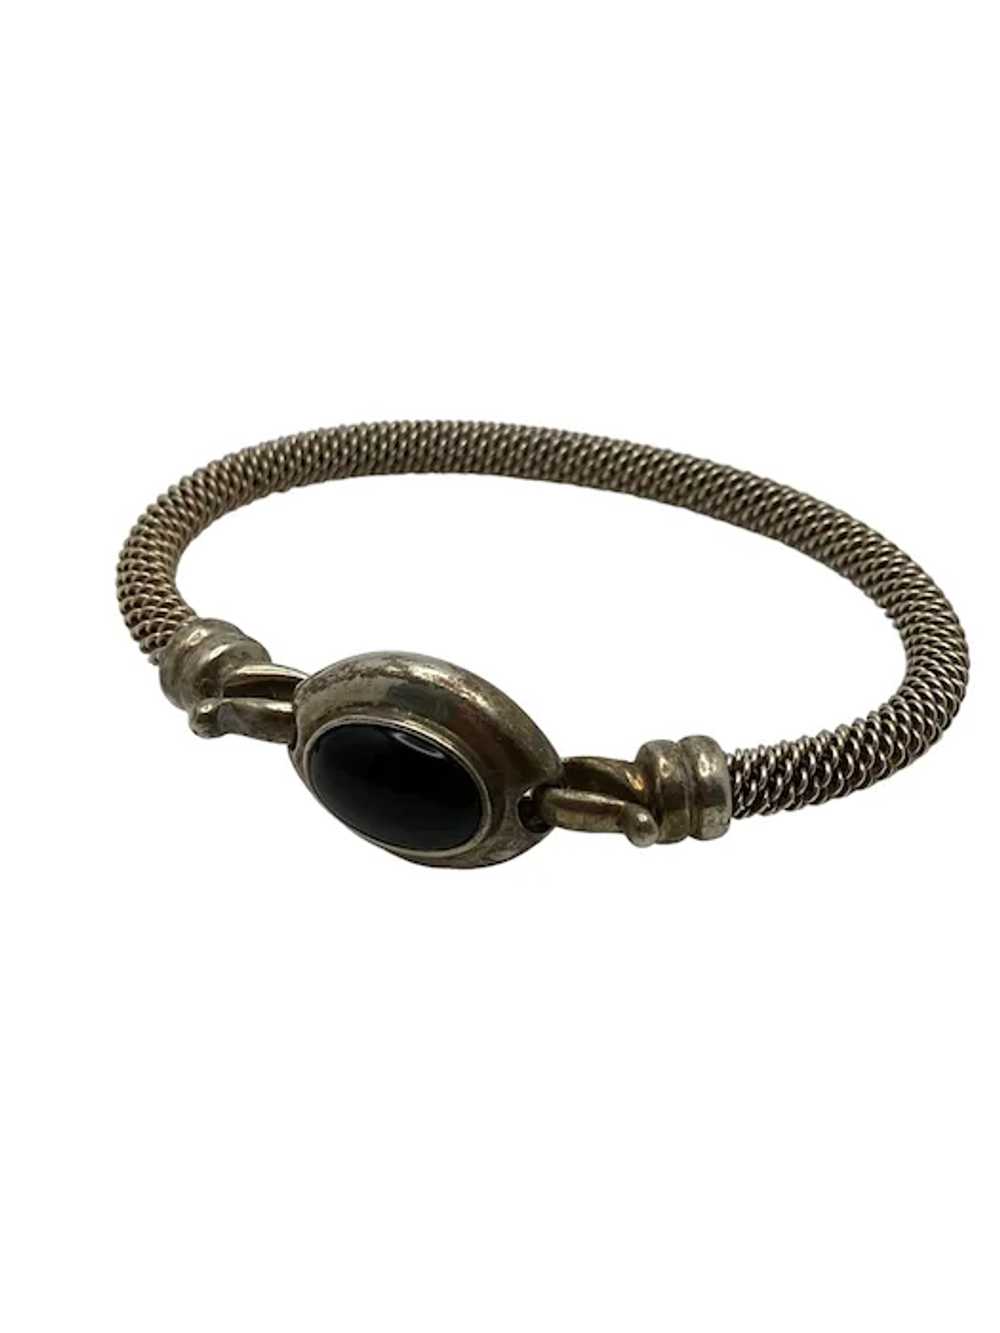 Joseph Esposito Sterling Silver and Onyx Bracelet - image 3